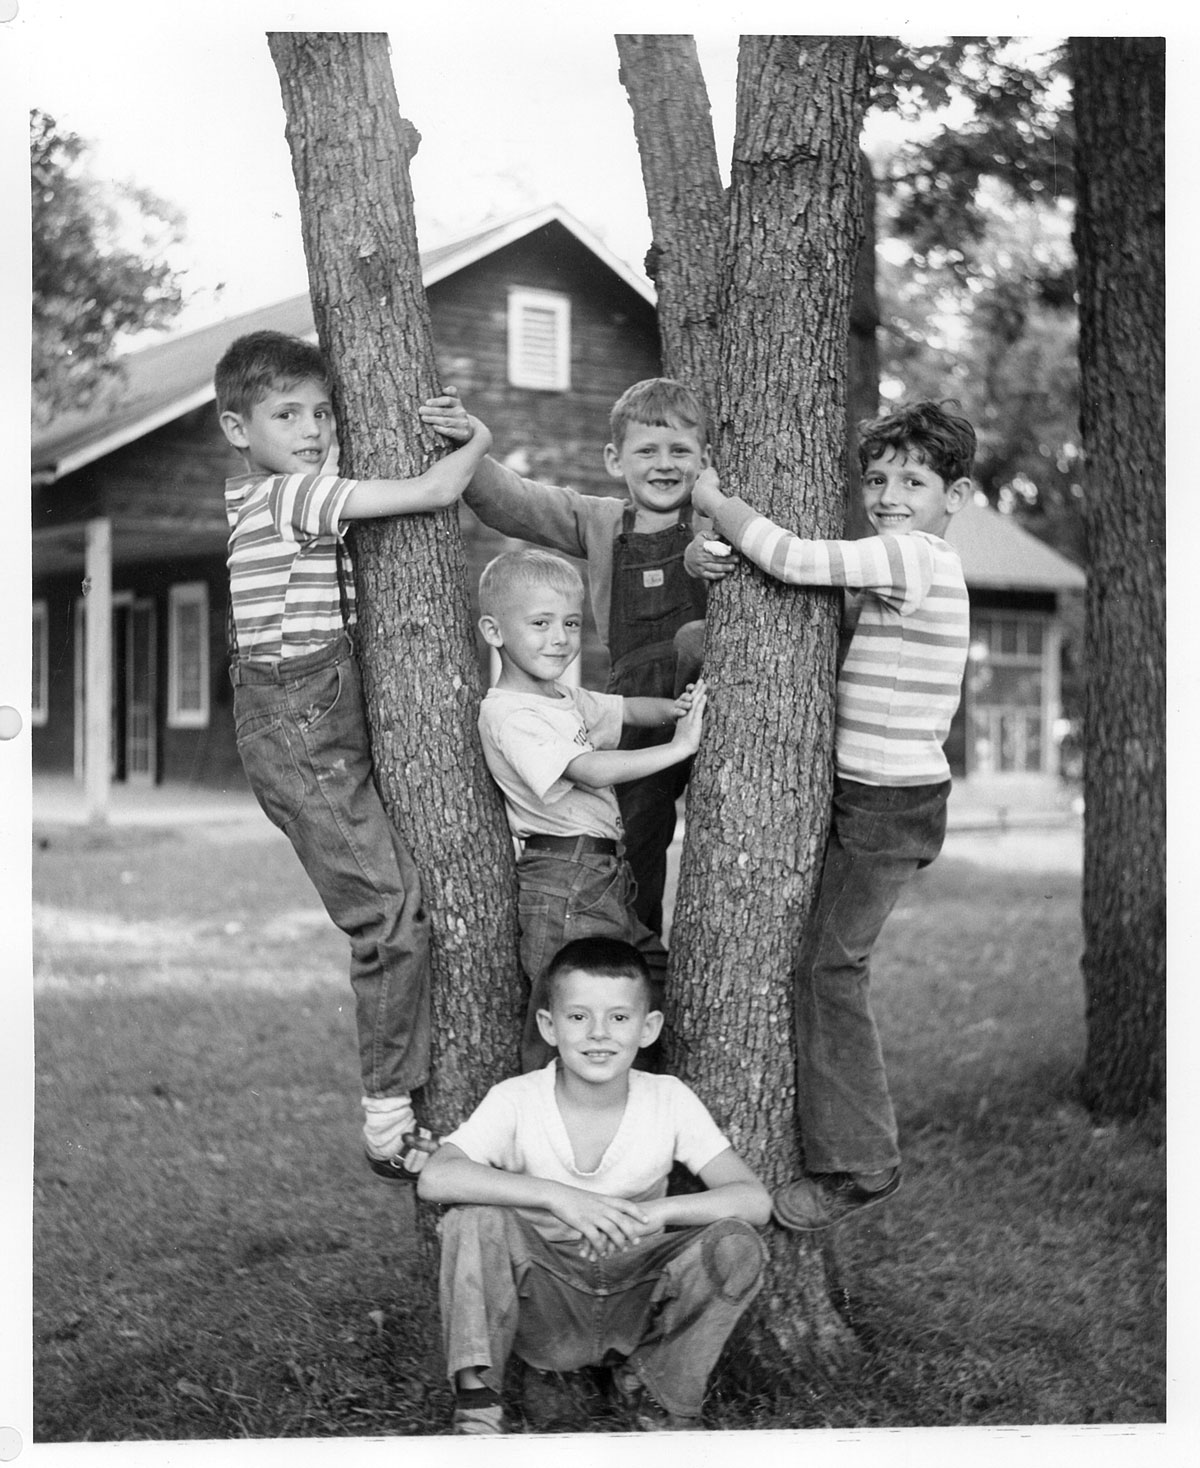 Union League Boys & Girls Club - 100th Anniversary - Our Archives - 1950s kids camp tree